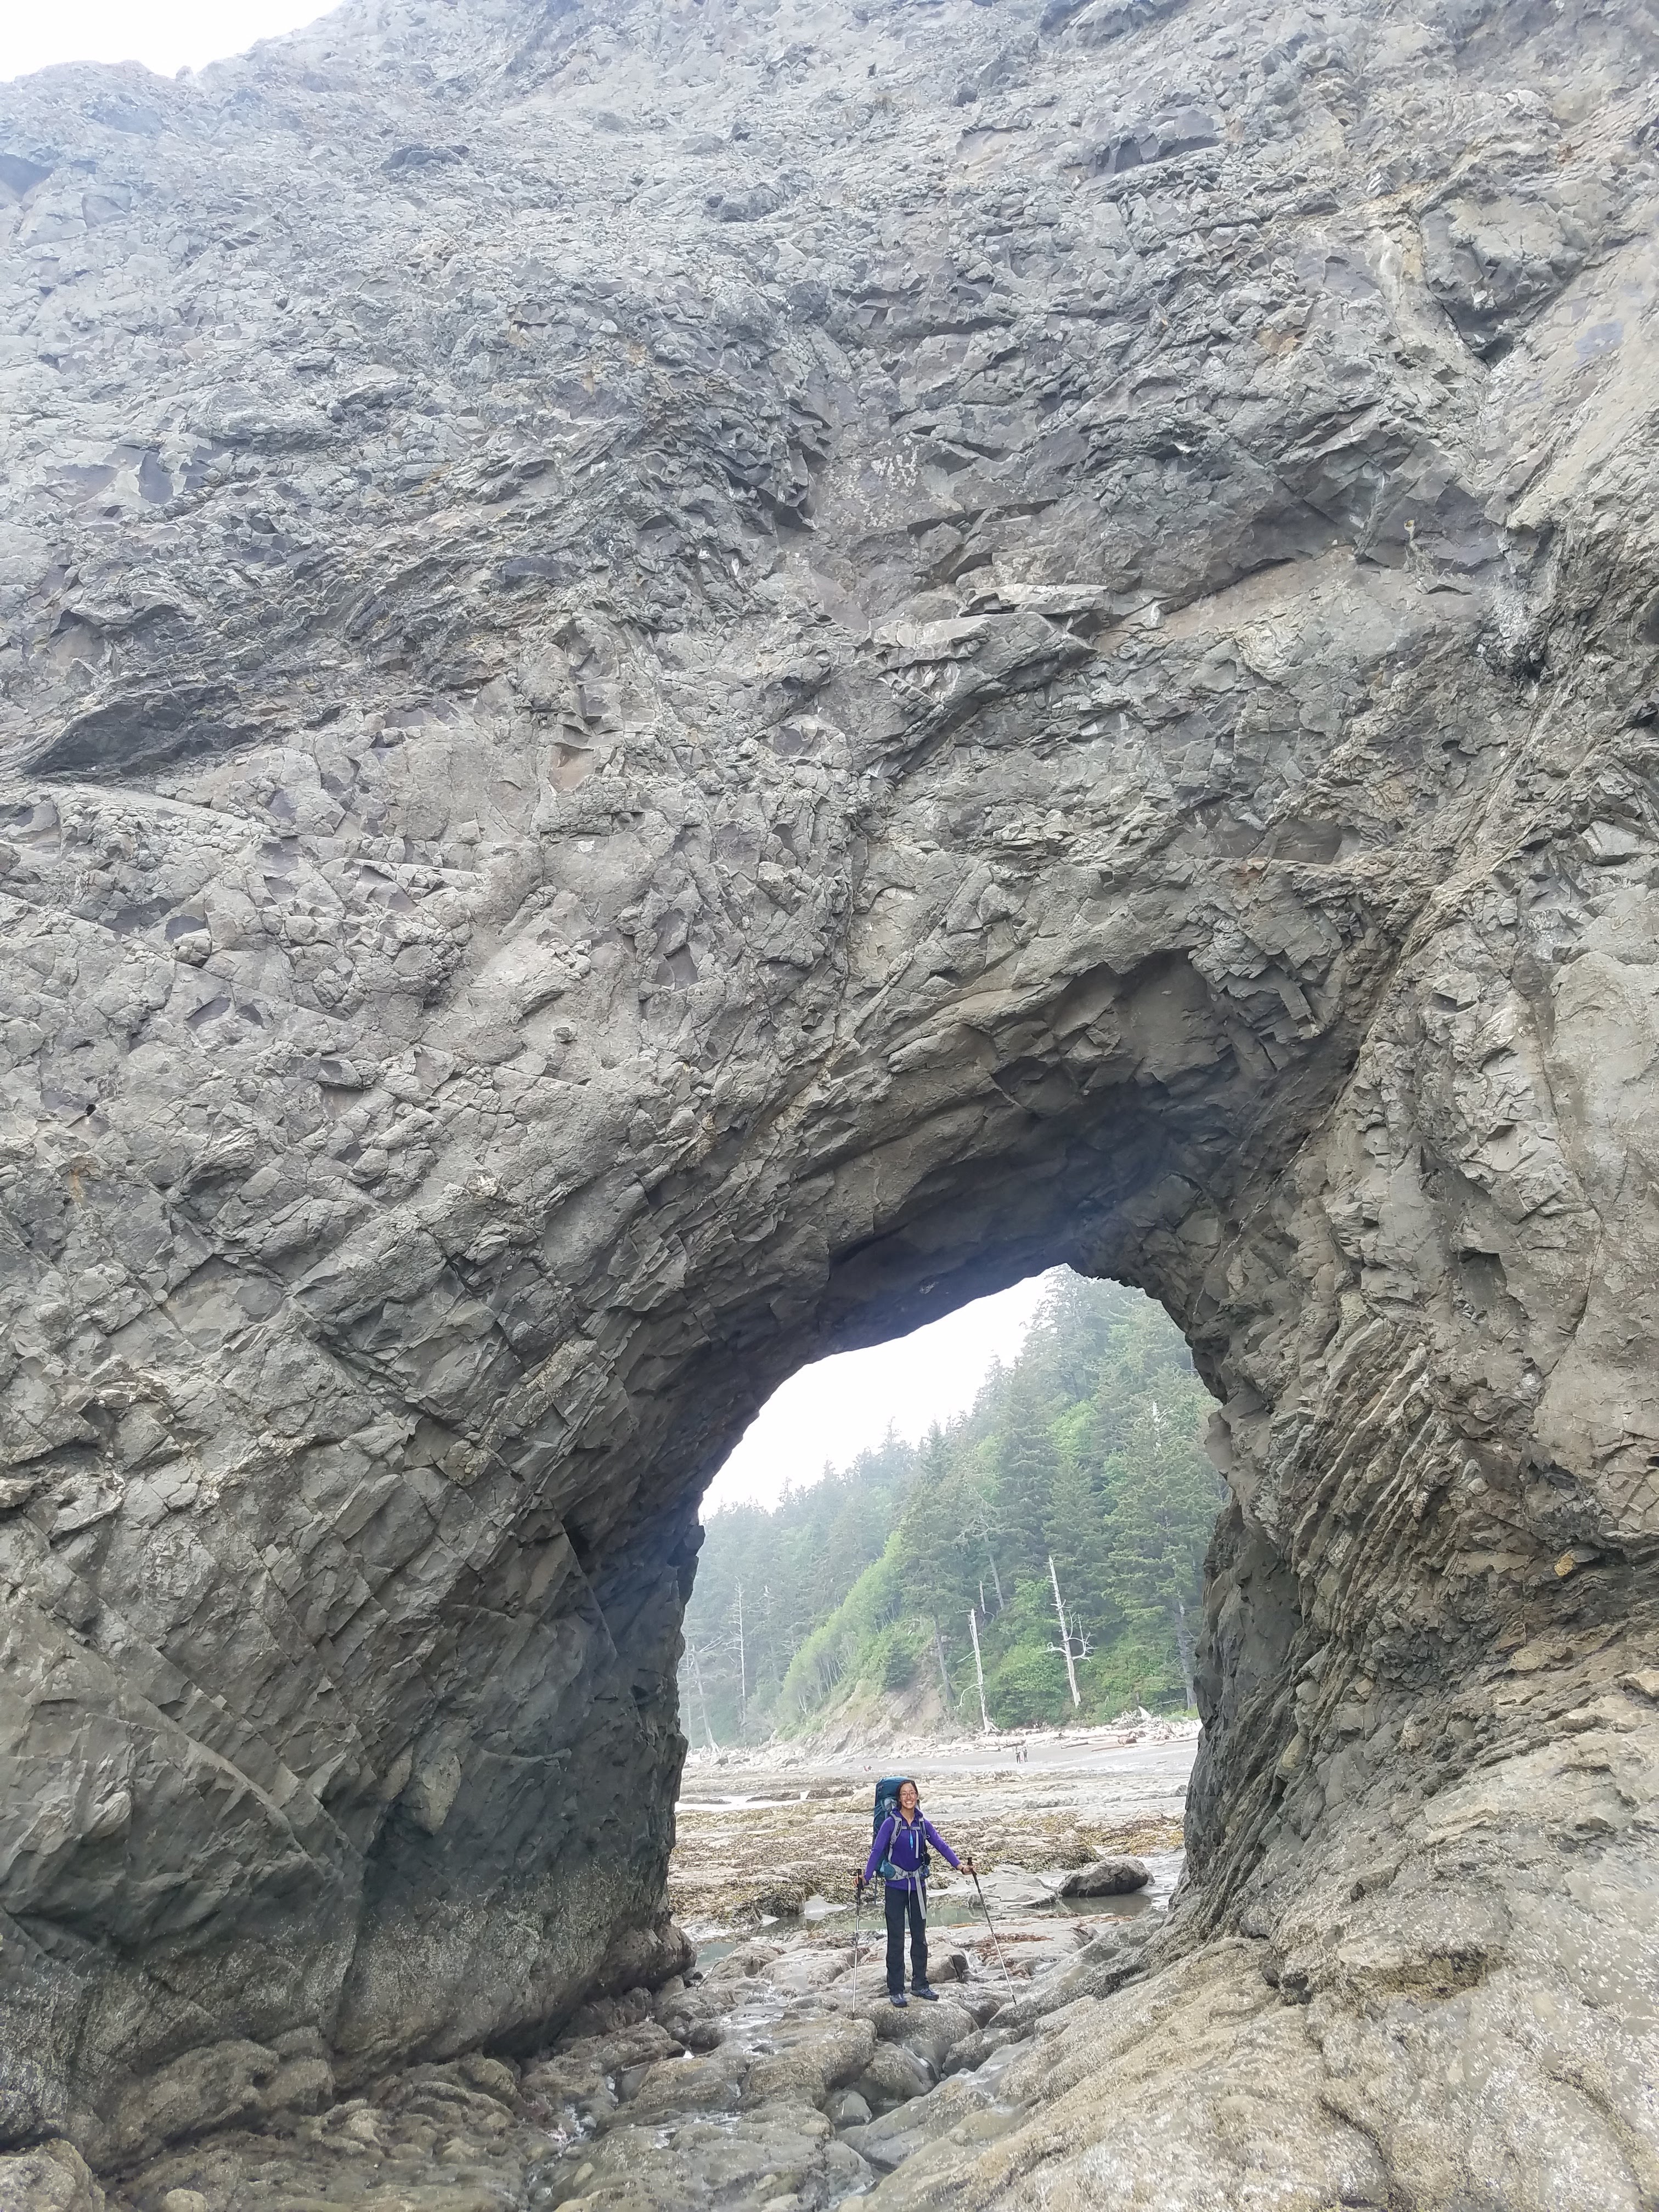 This place is called Hole-In-The-Wall! You can walk through the hole during low tide. Three years ago, I came here with some college friends. It's possible to day hike here from Rialto Beach.